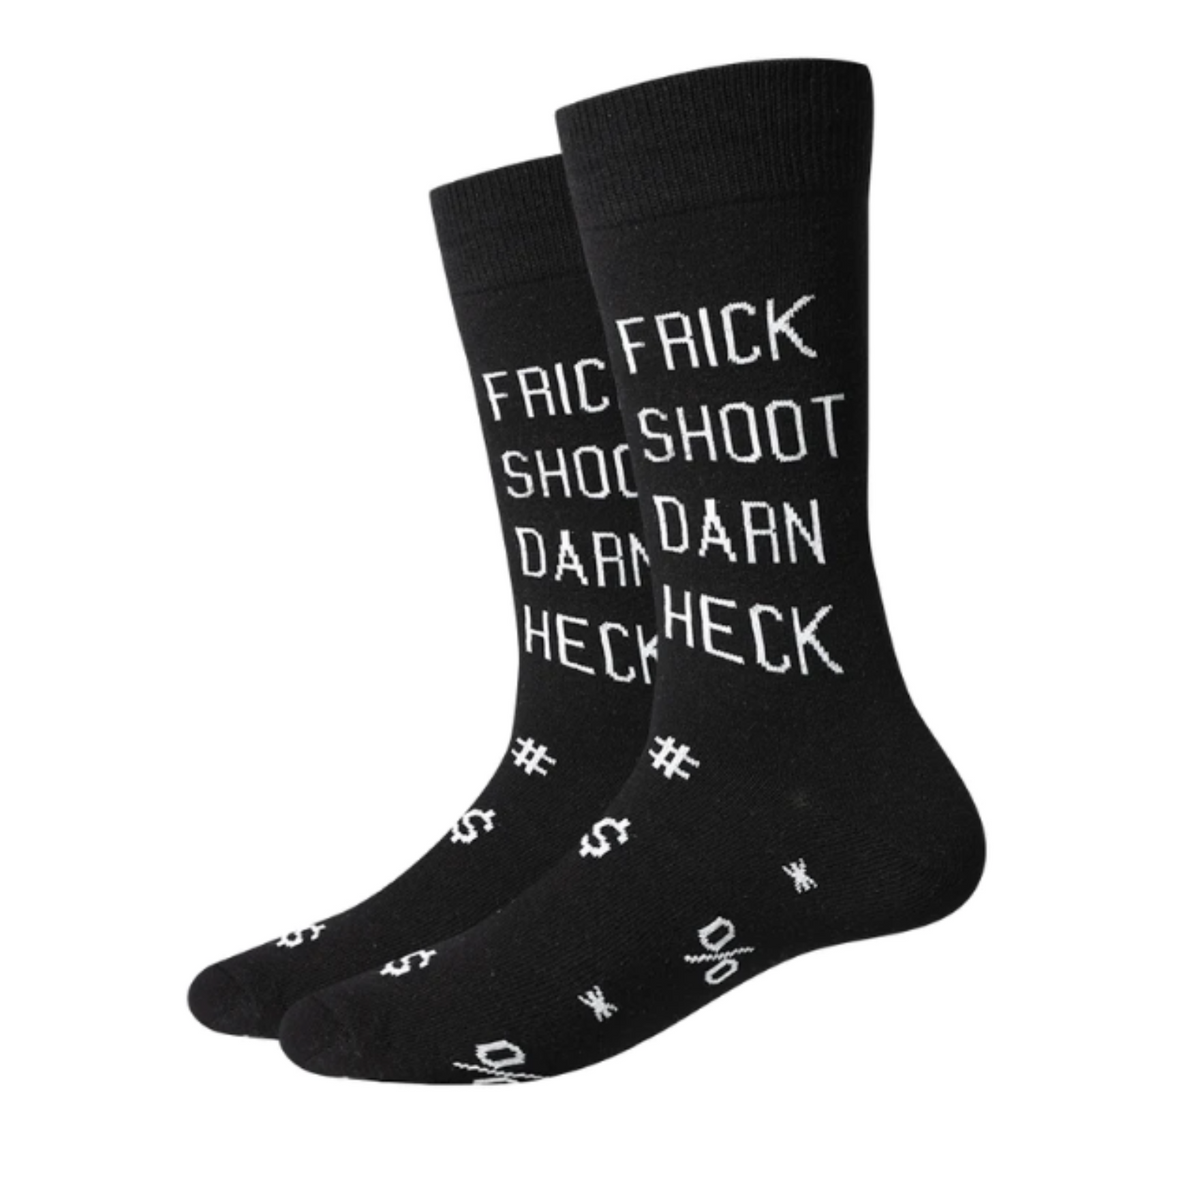 Sock Harbor Frick Shoot men&#39;s sock featuring black sock with words &quot;Frick, Shoot, Darn, Heck&quot; and punctuation marks in white font on display feet